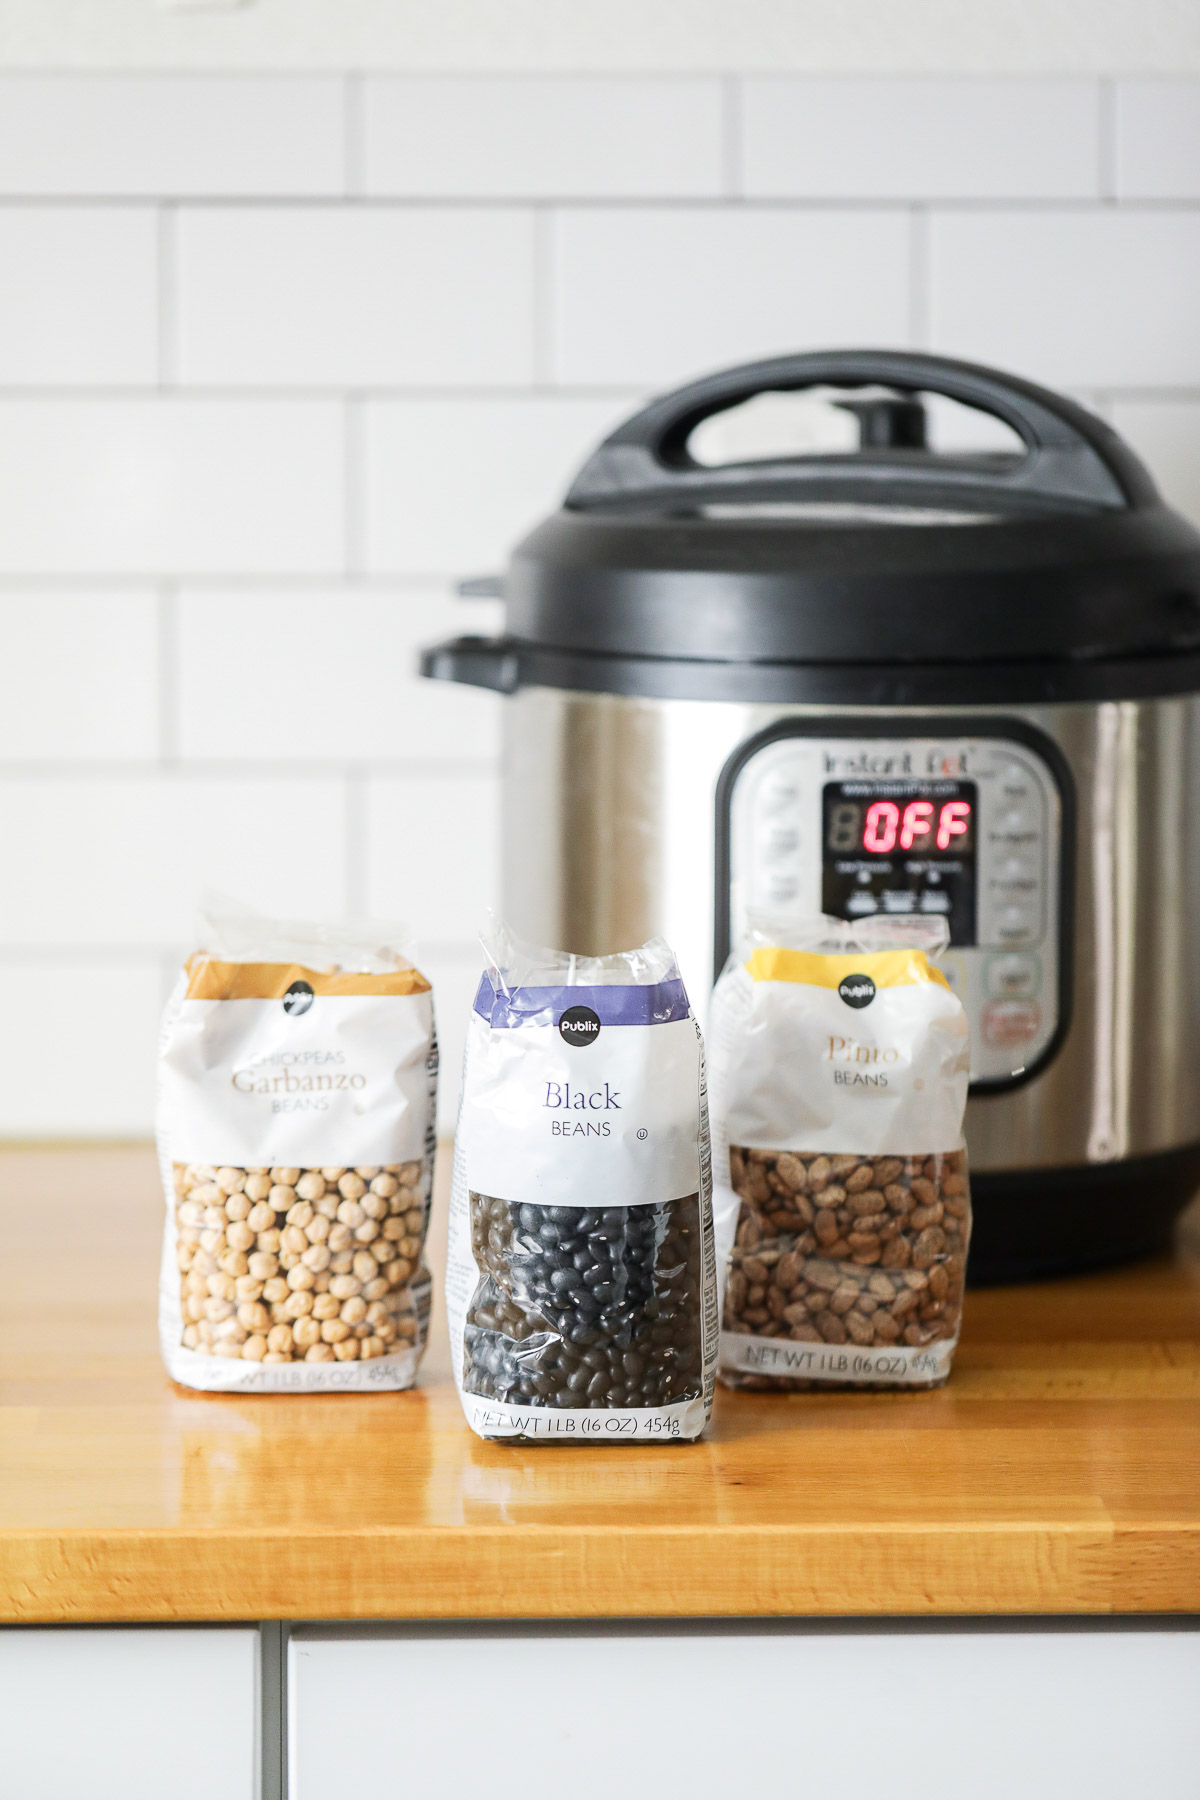 Different types of beans: black beans, chickpeas, and pinto beans on a counter next to an Instant Pot.